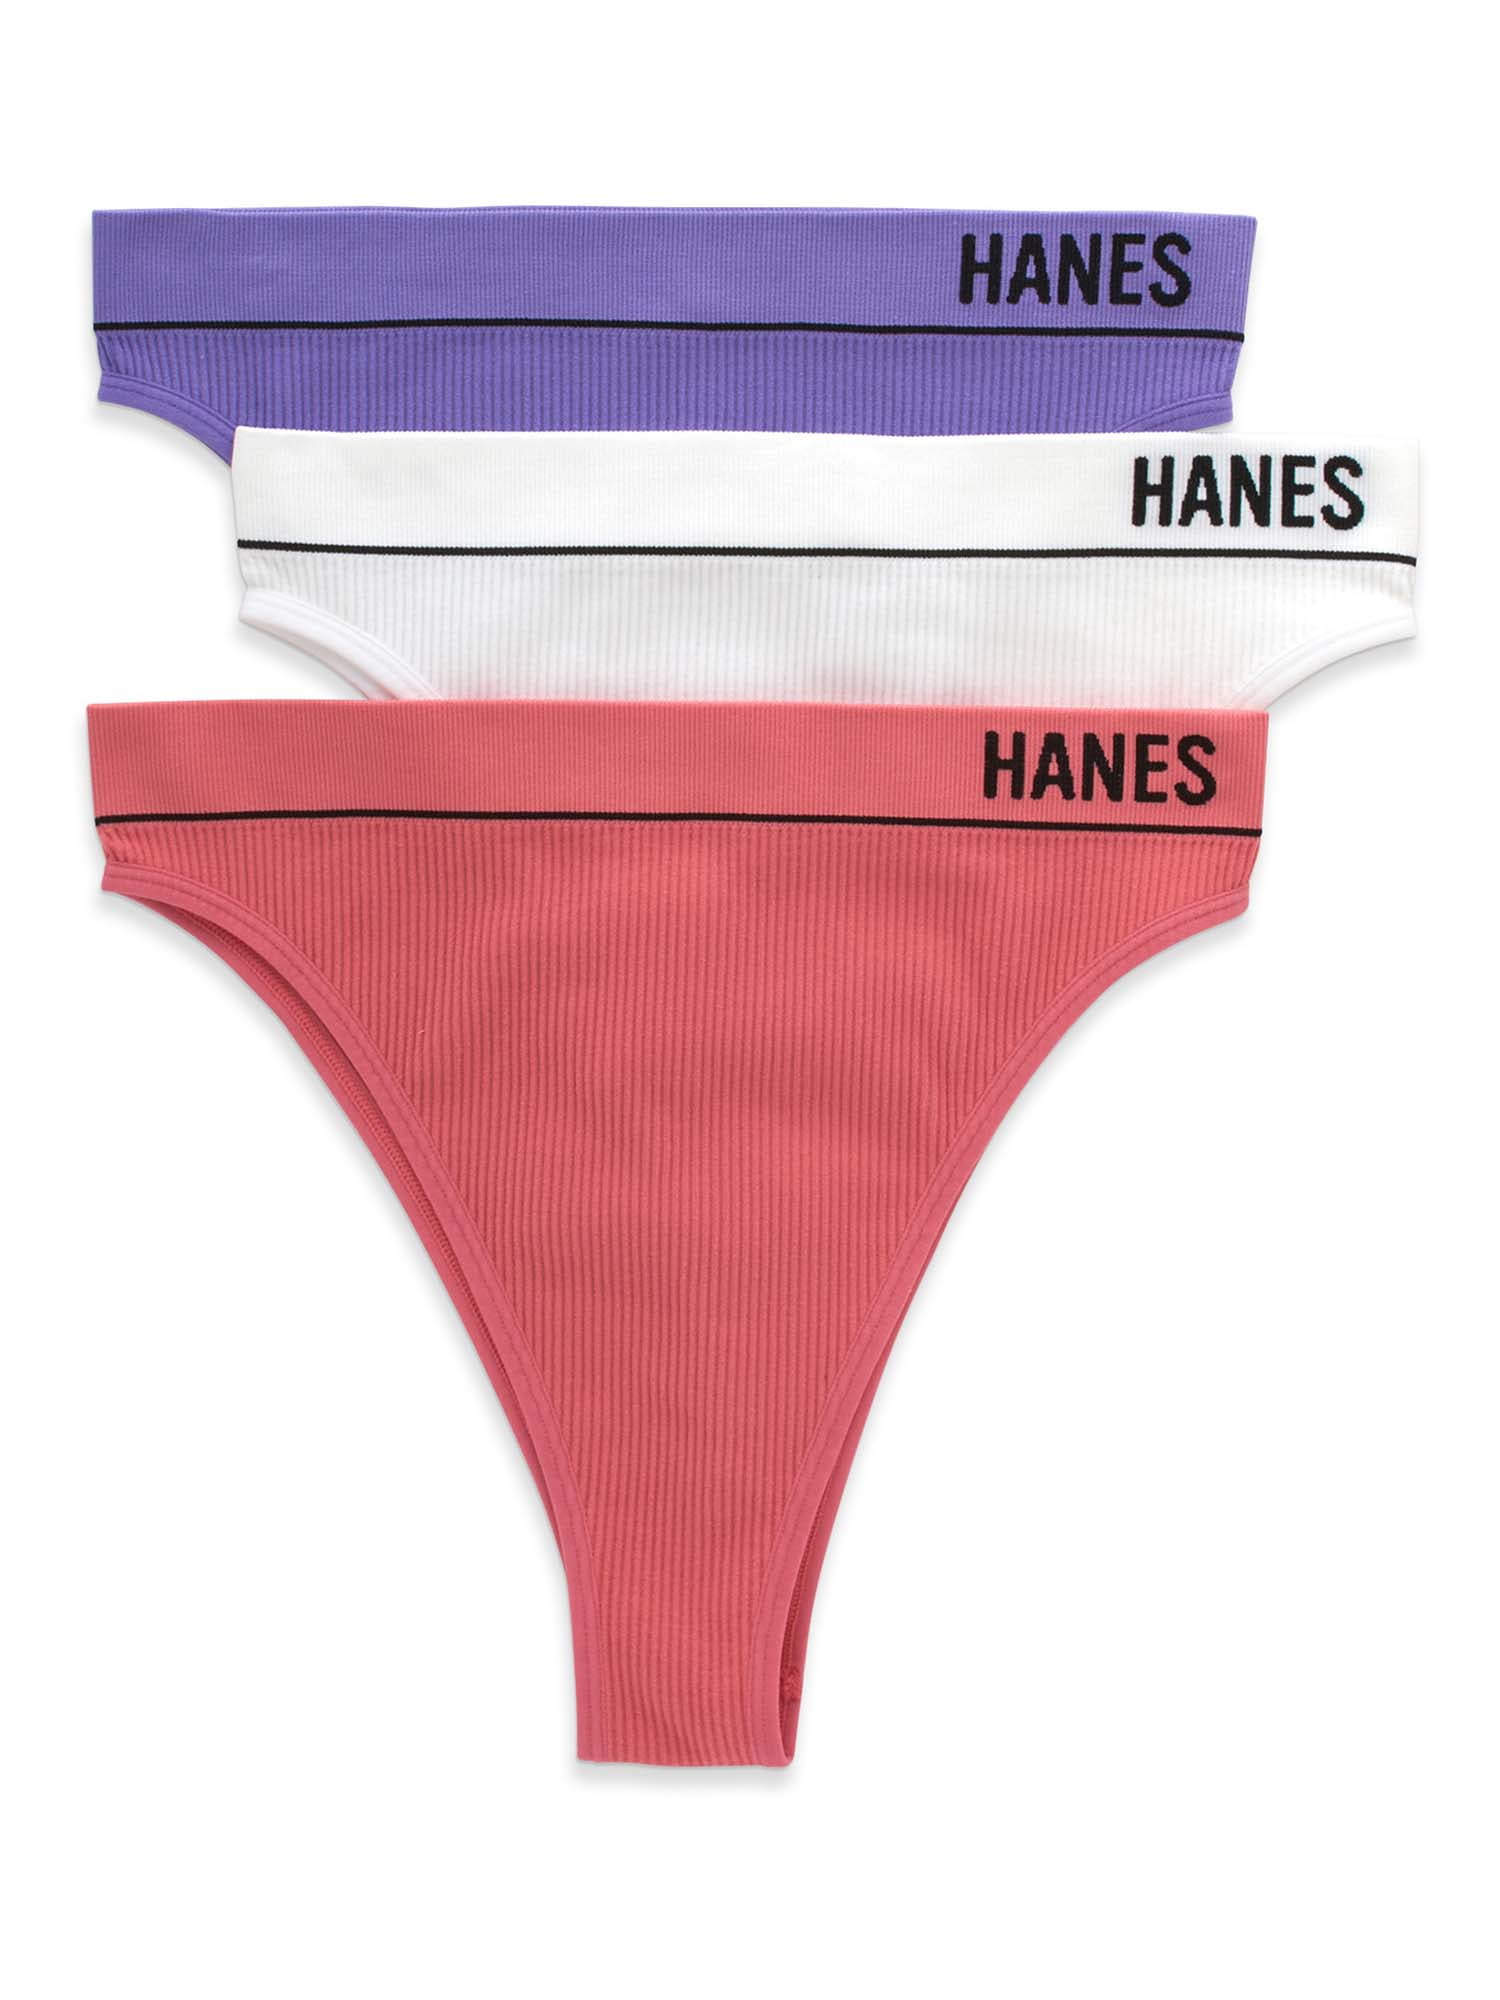 Hanes Women's Originals Seamless Stretchy Ribbed Boyfit Panties Pack,  Assorted Colors, 6-Pack, Goldie/White/Gumball Pink at  Women's  Clothing store